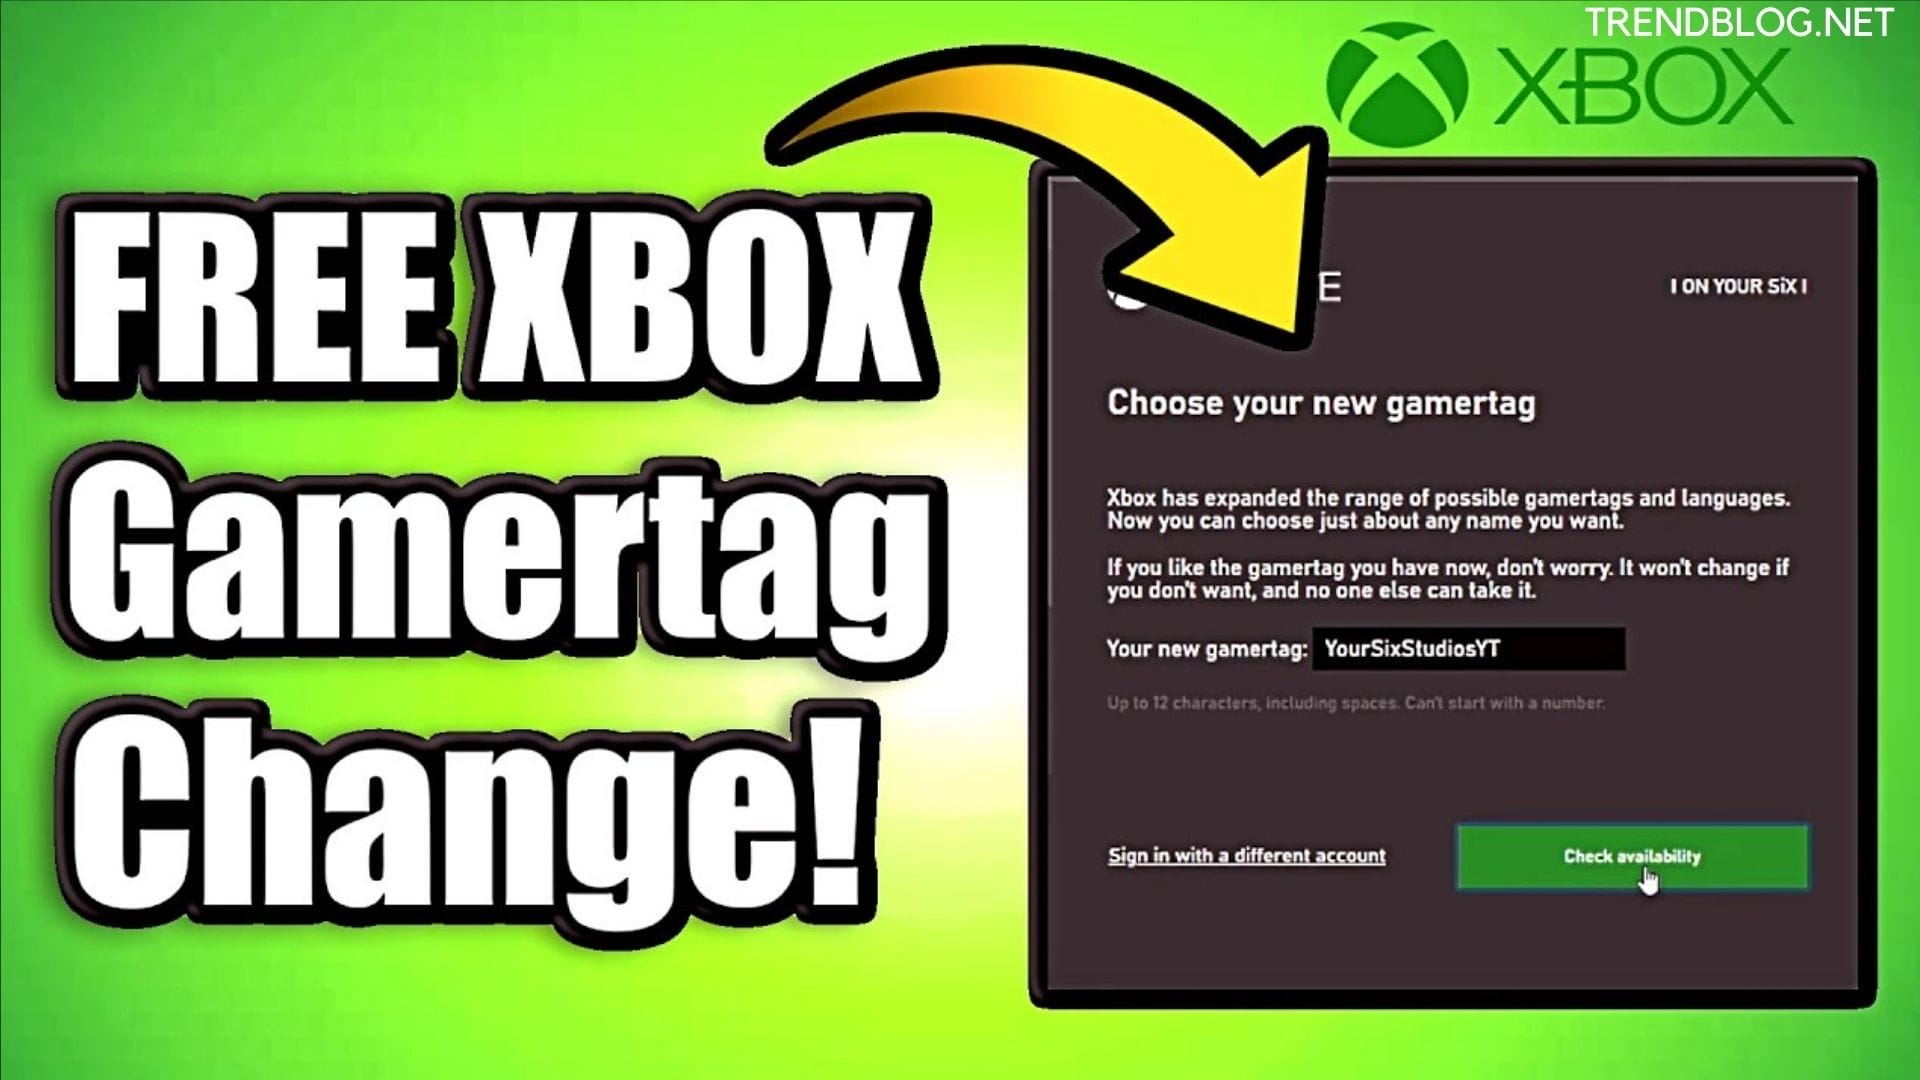 How to Change Xbox Gamertag